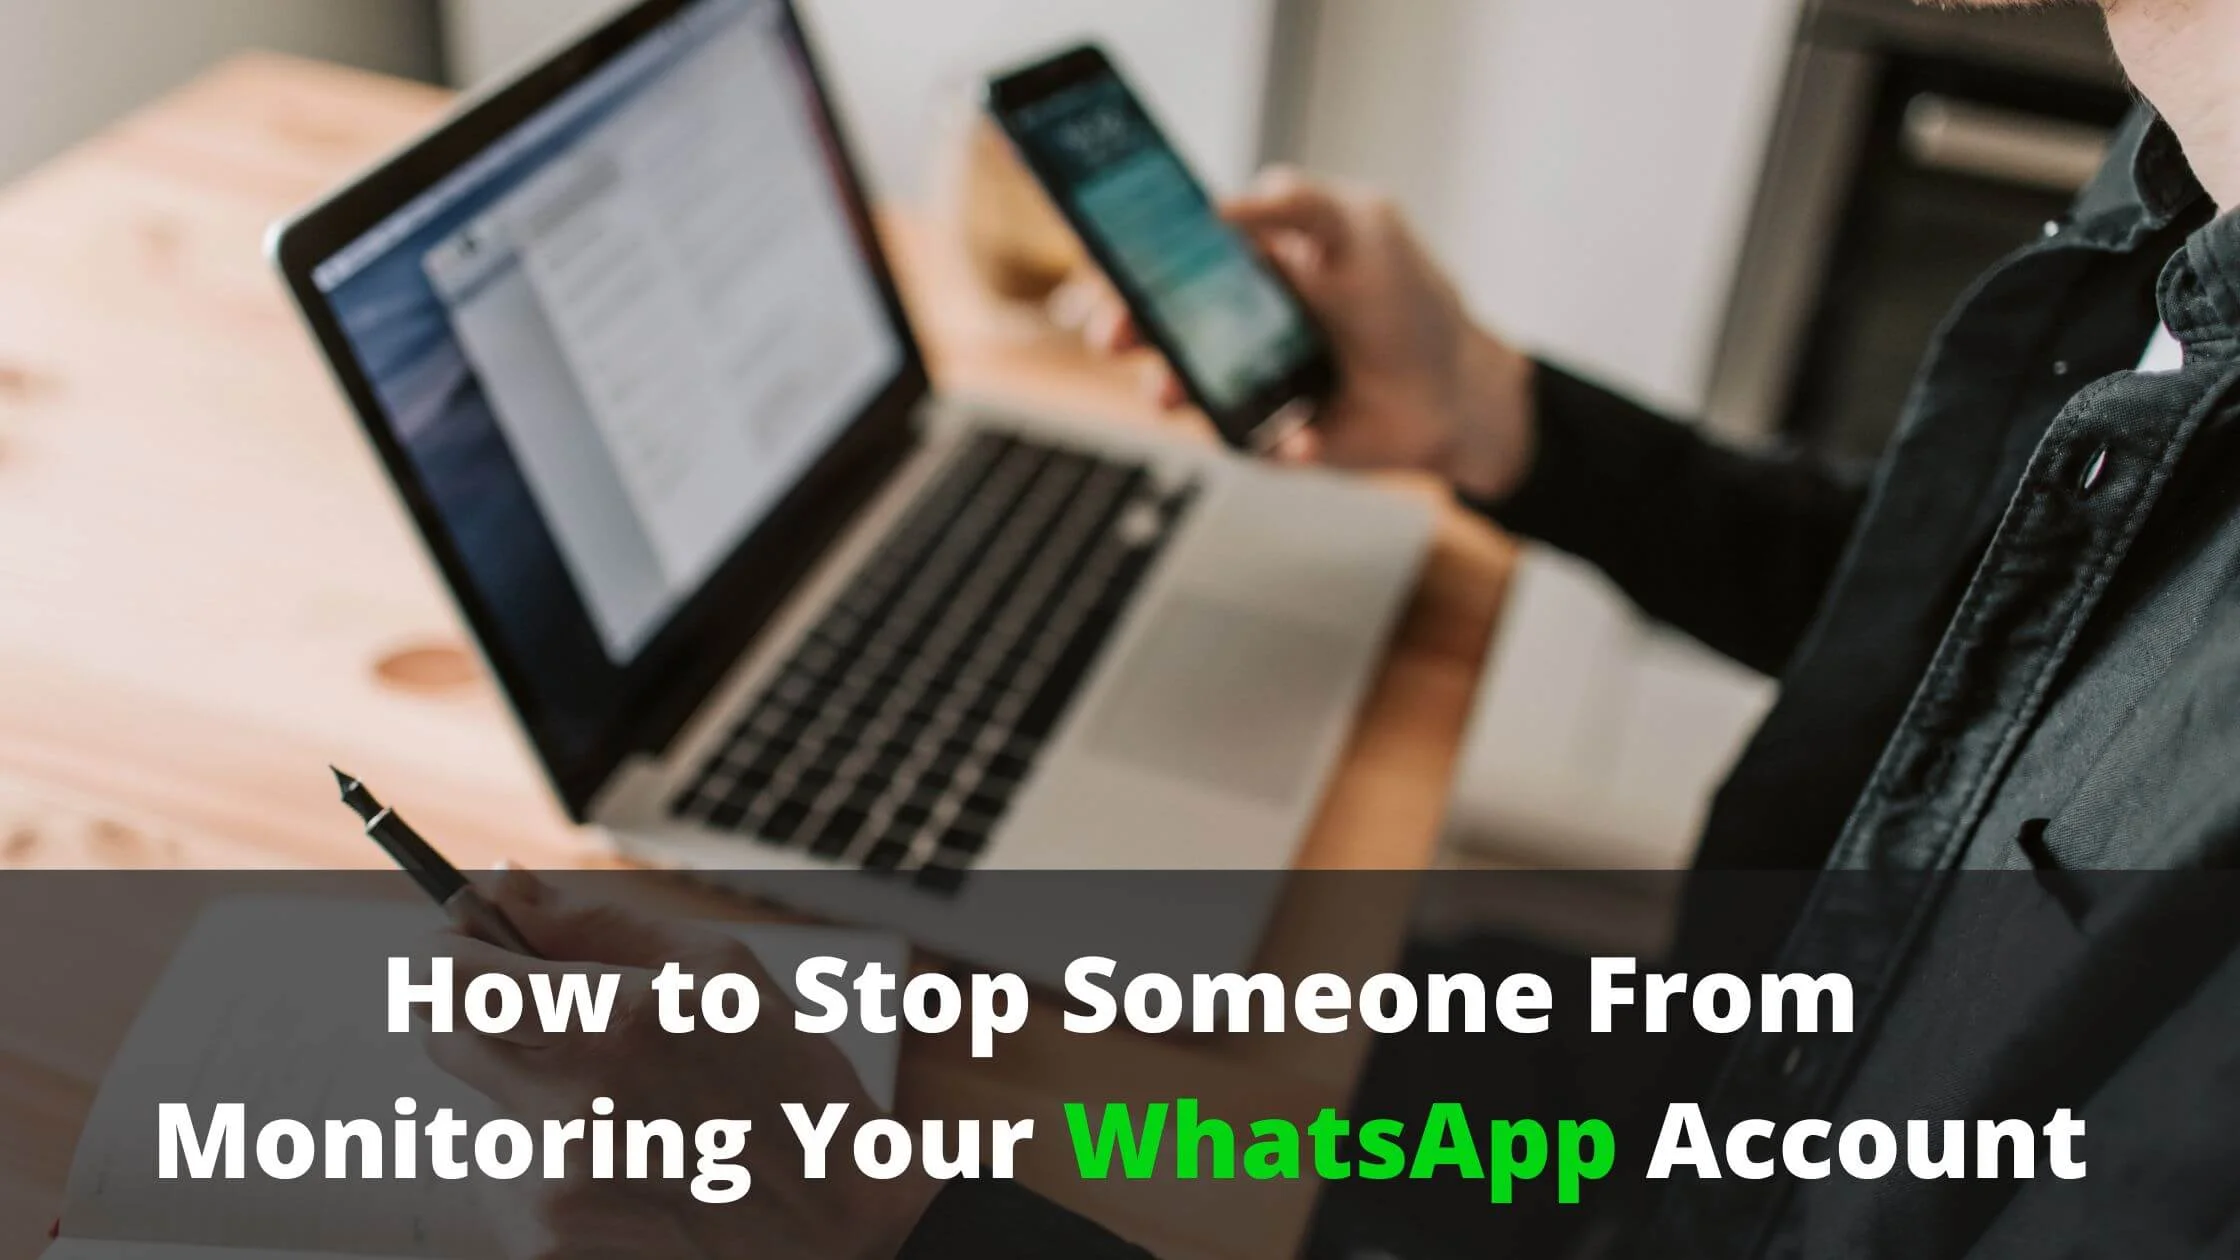 Stop Someone From Monitoring Your WhatsApp Account